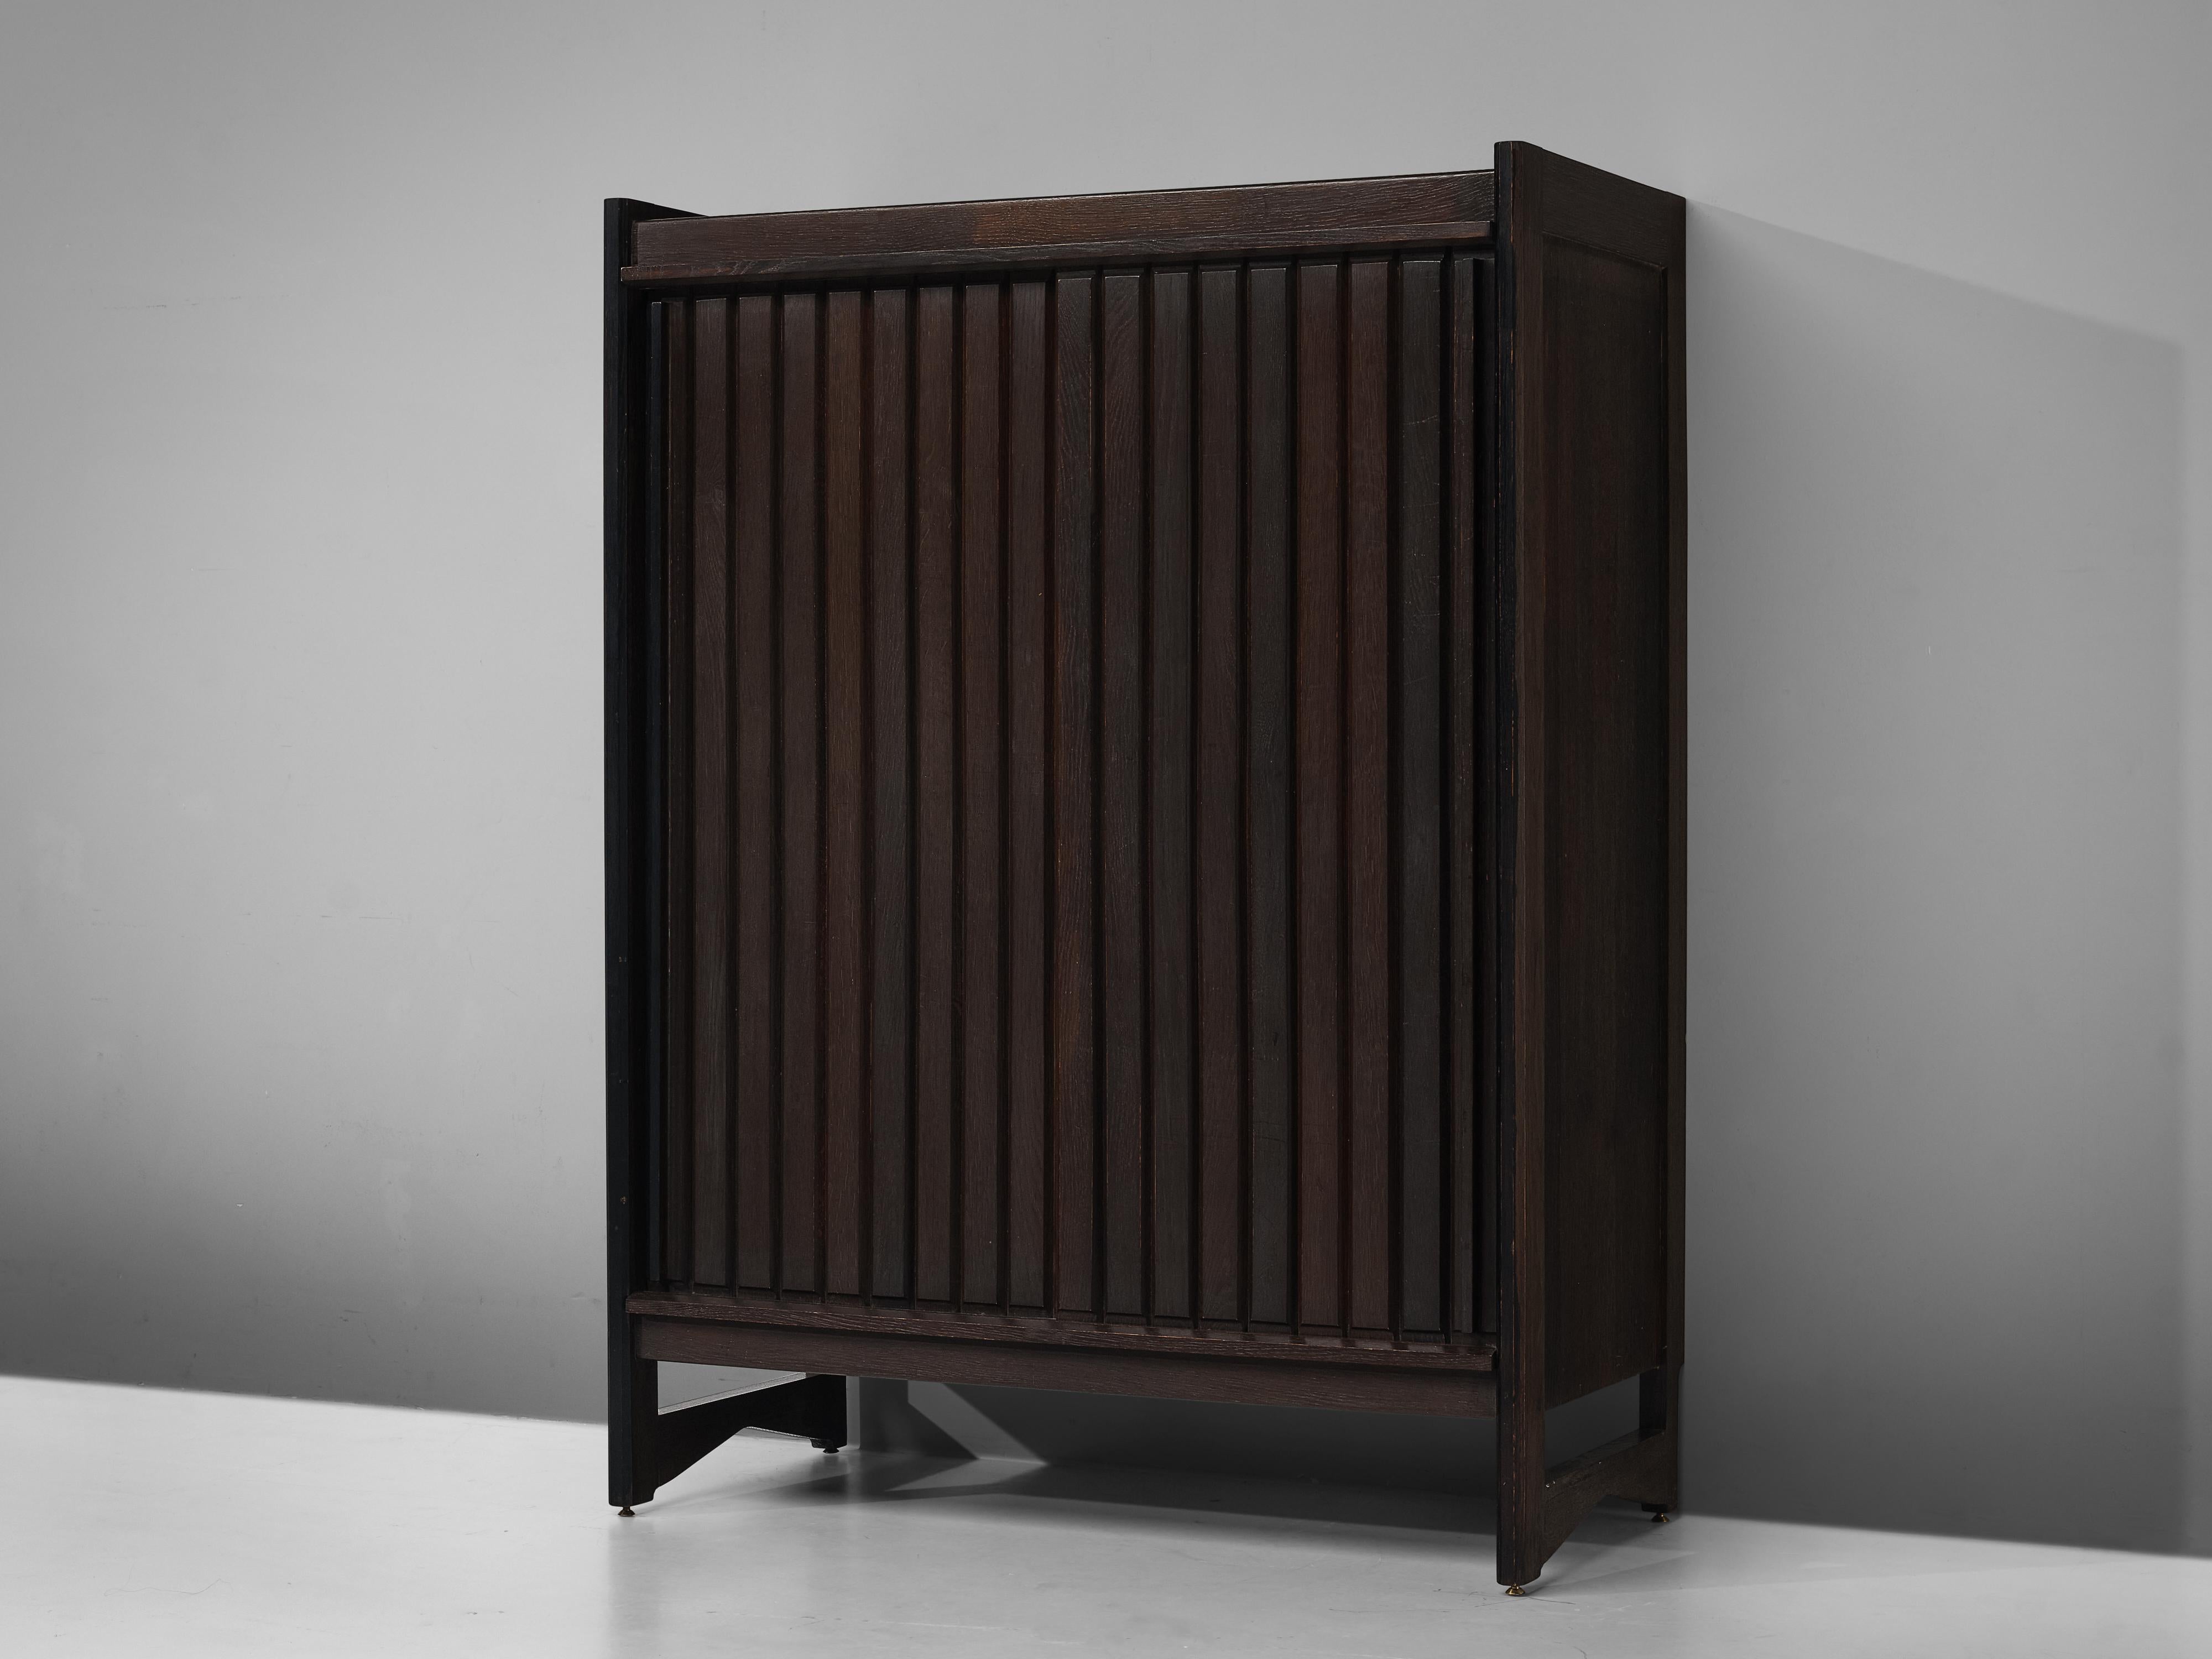 Guillerme & Chambron, cabinet, oak, France, 1960s

This sculptural cabinet is made by the designer duo Guillerme & Chambron. The piece is executed in solid, stained oak and features sculptural lines and edges. The design consists out of two larger